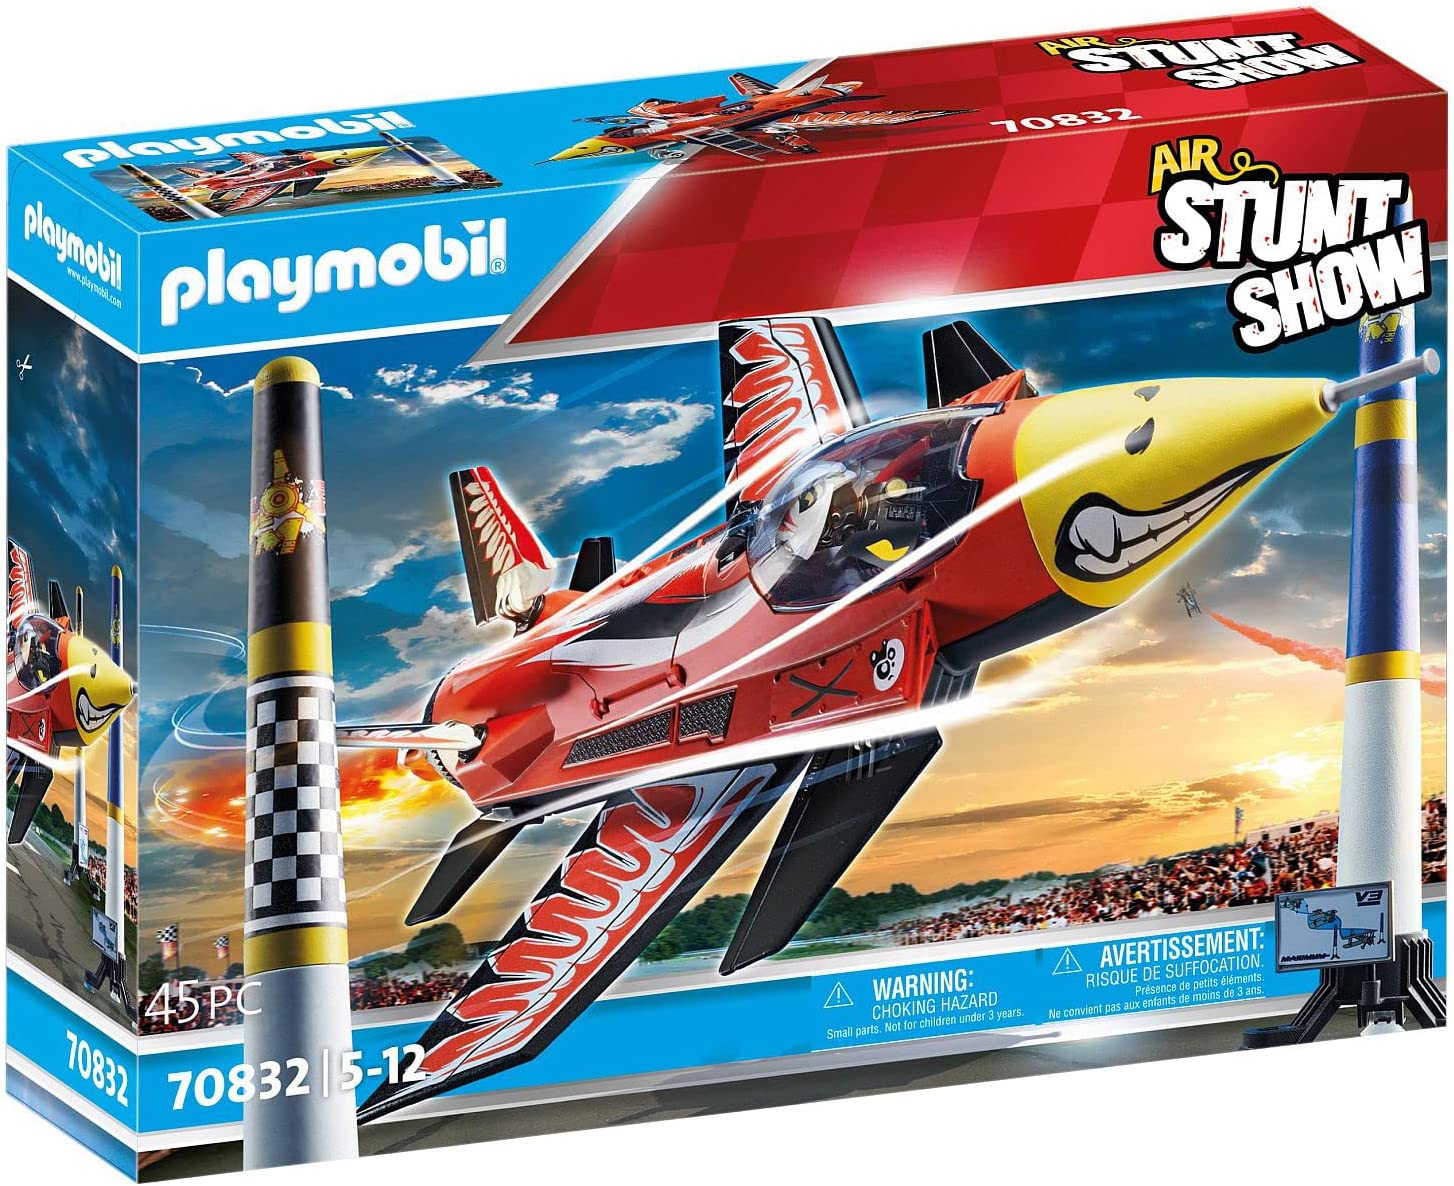 PLAYMOBIL Air Stunt Show 70832 \"Eagle\" Nozzle Jet with Rotating Motor Turbine with Wind Up Motor and Foldable Chassis, for Children from 5 Years